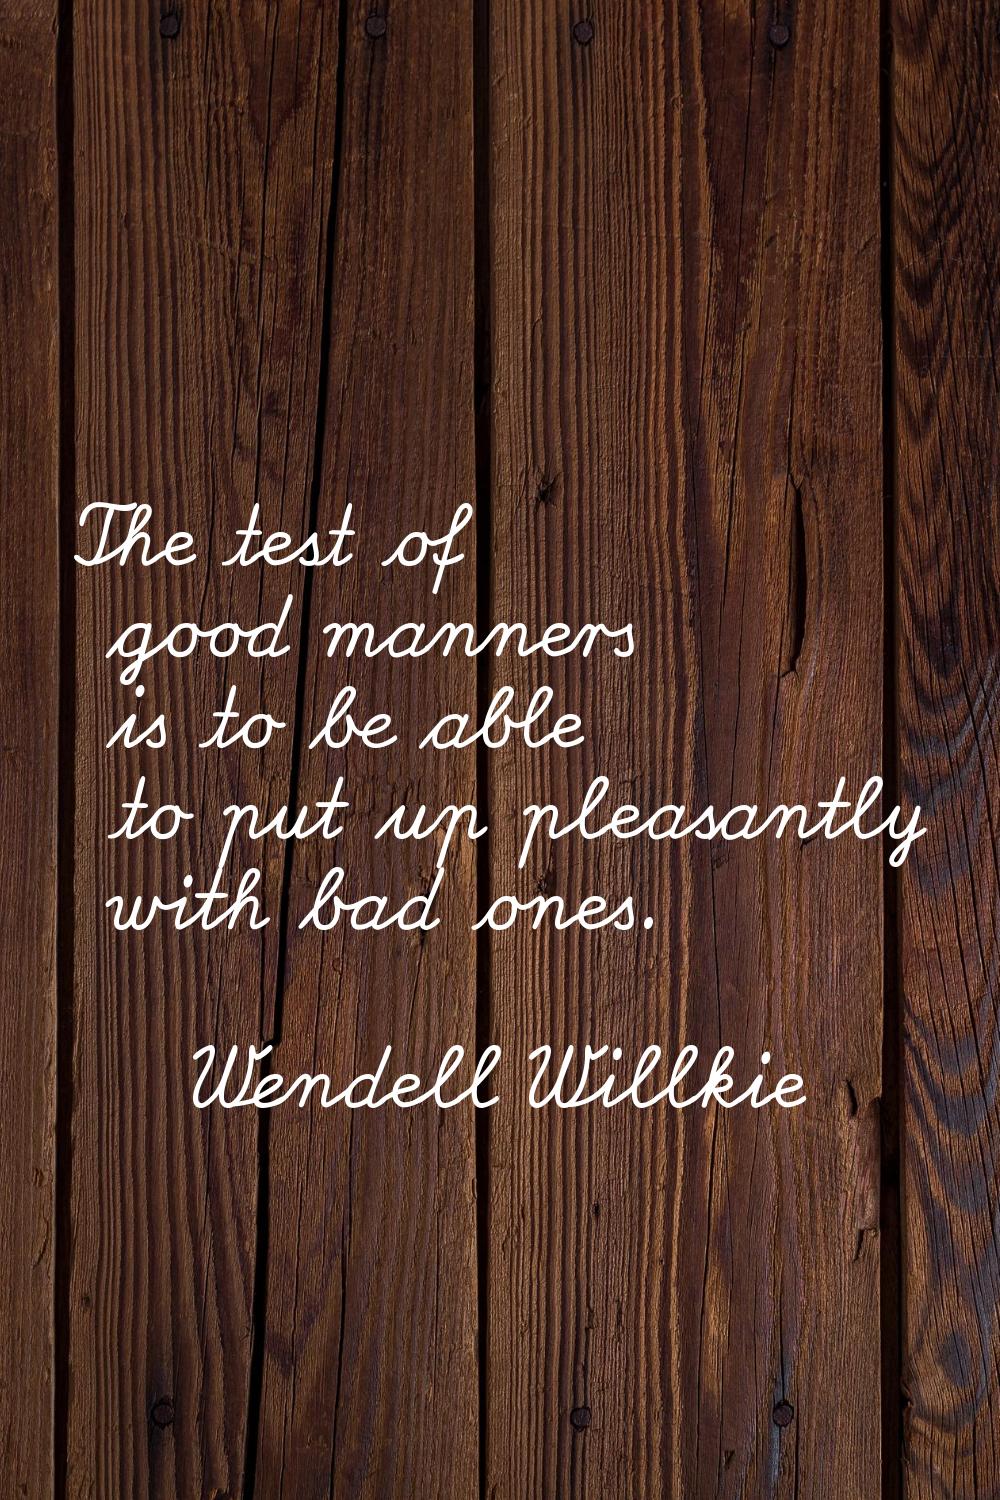 The test of good manners is to be able to put up pleasantly with bad ones.